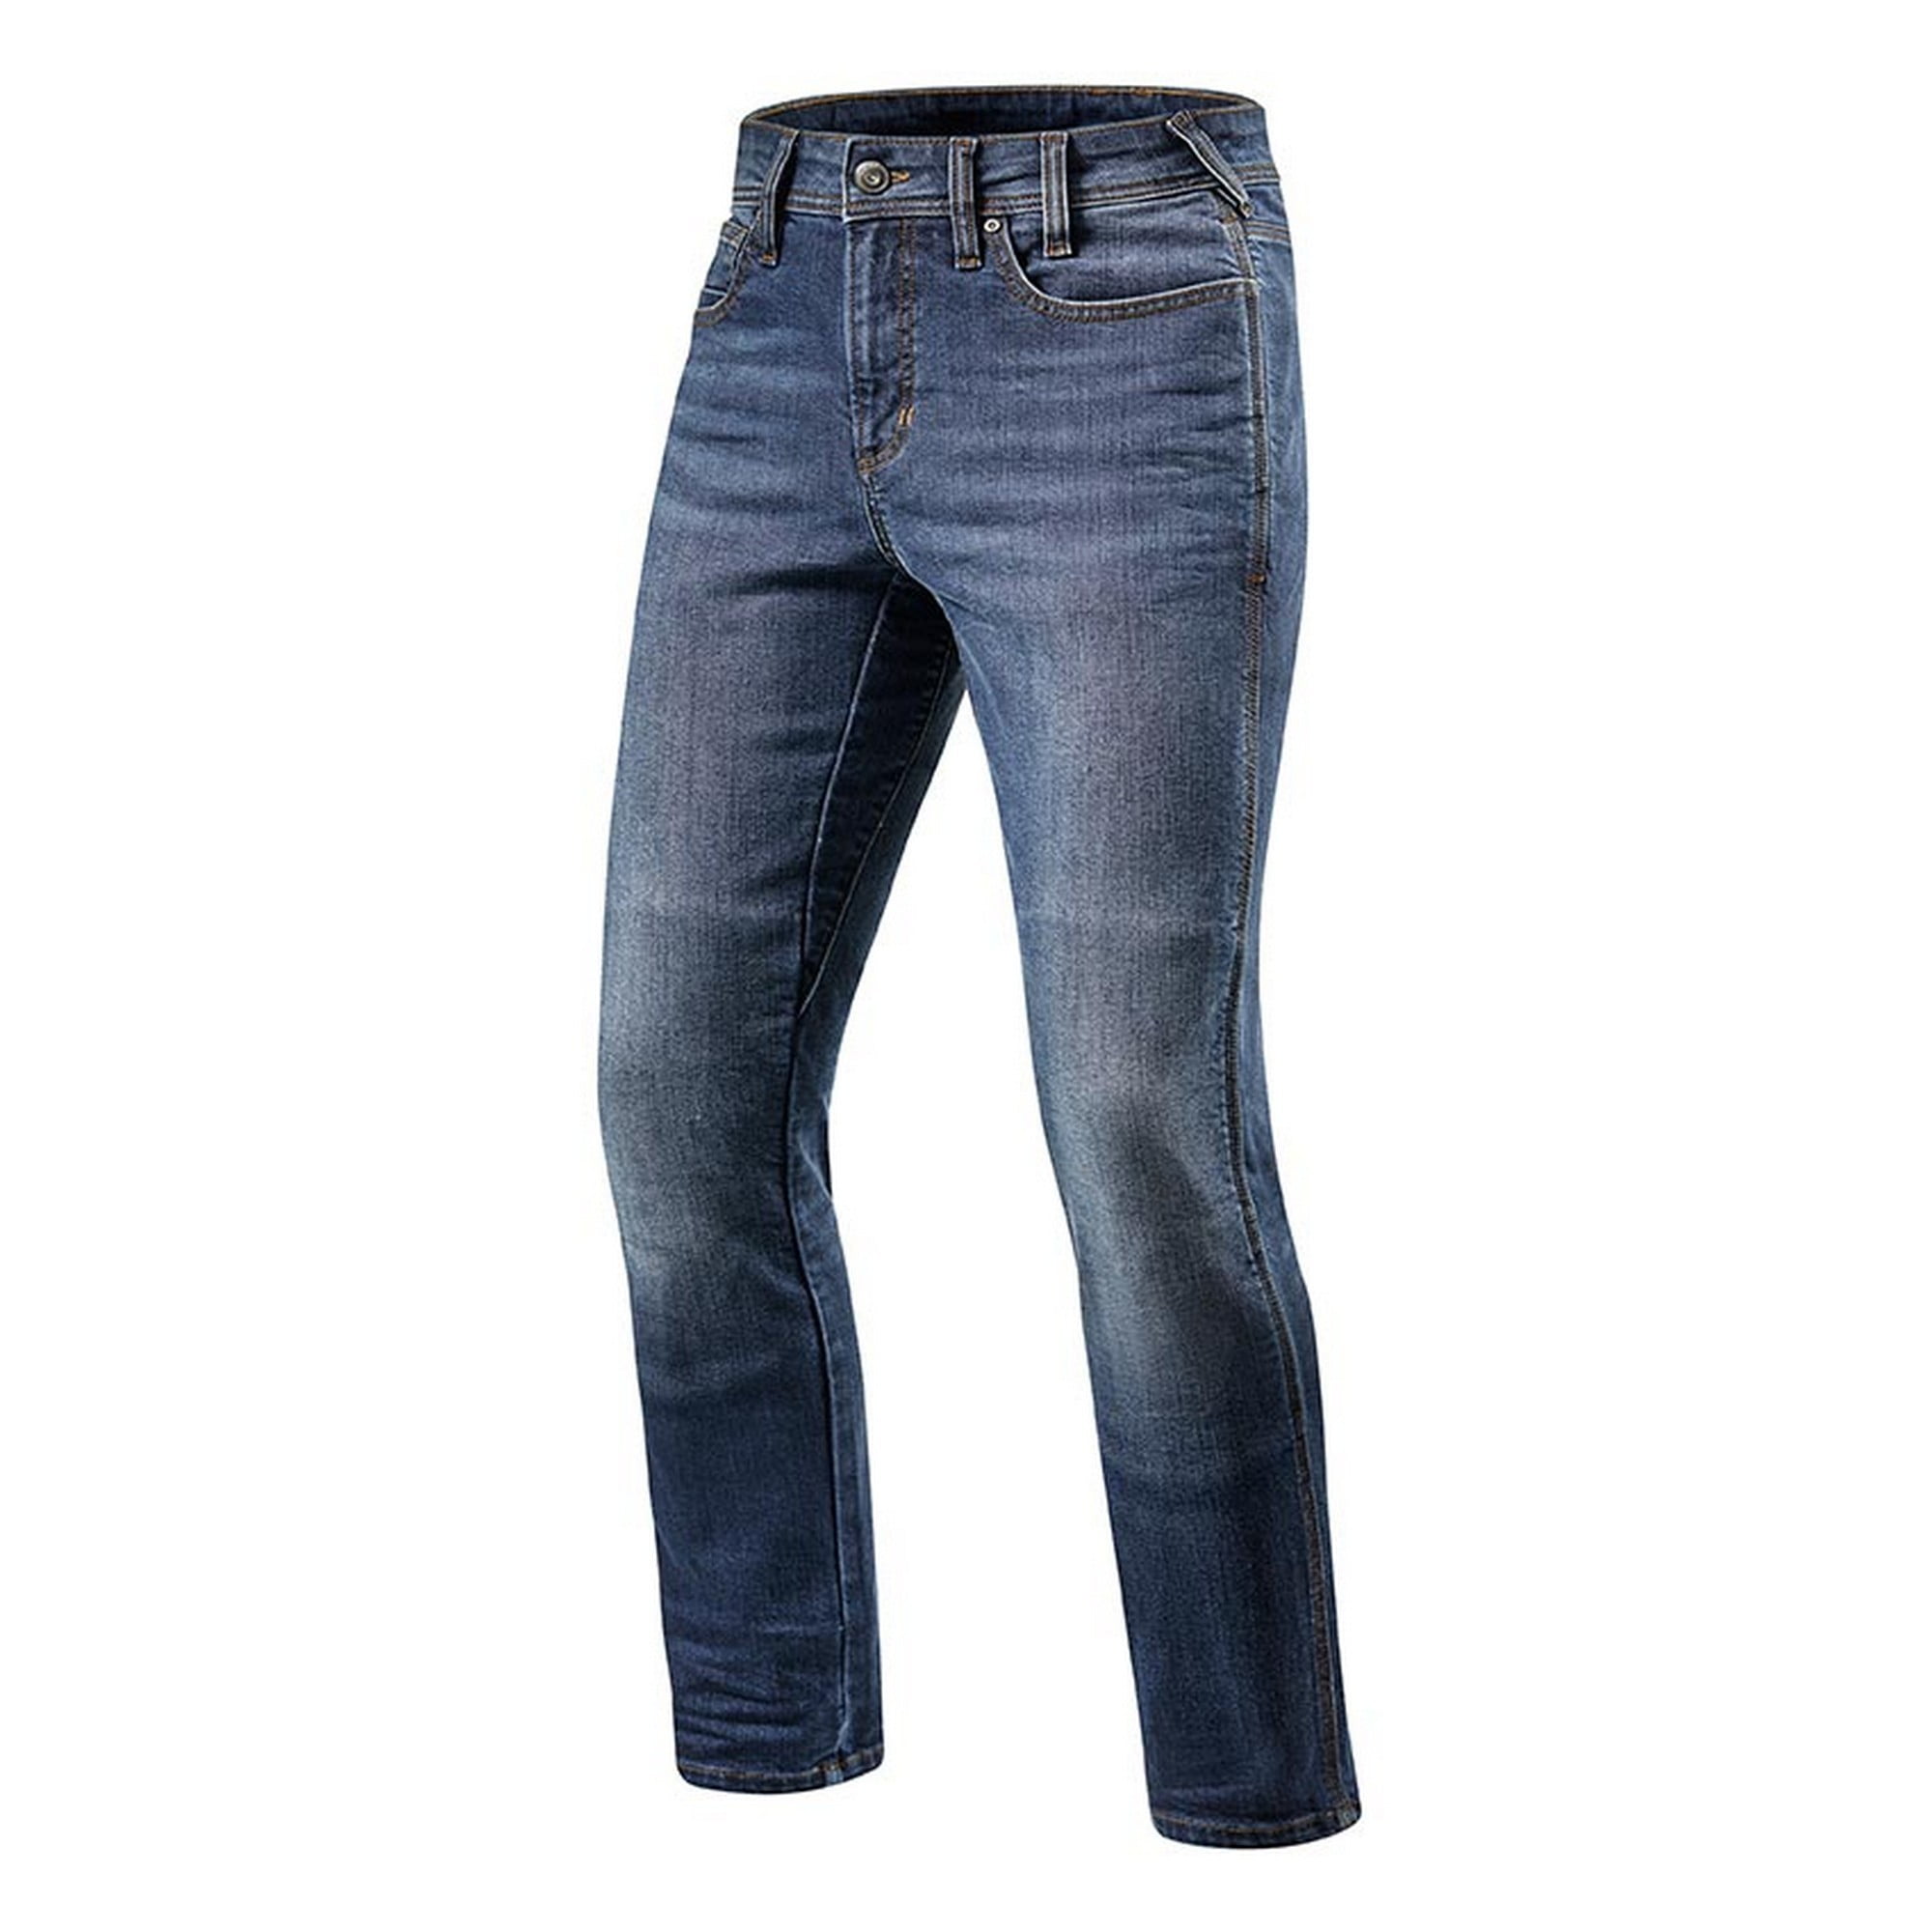 Rev'It Brentwood Mens Slim Fit Jeans Light Used 36 x 34 -